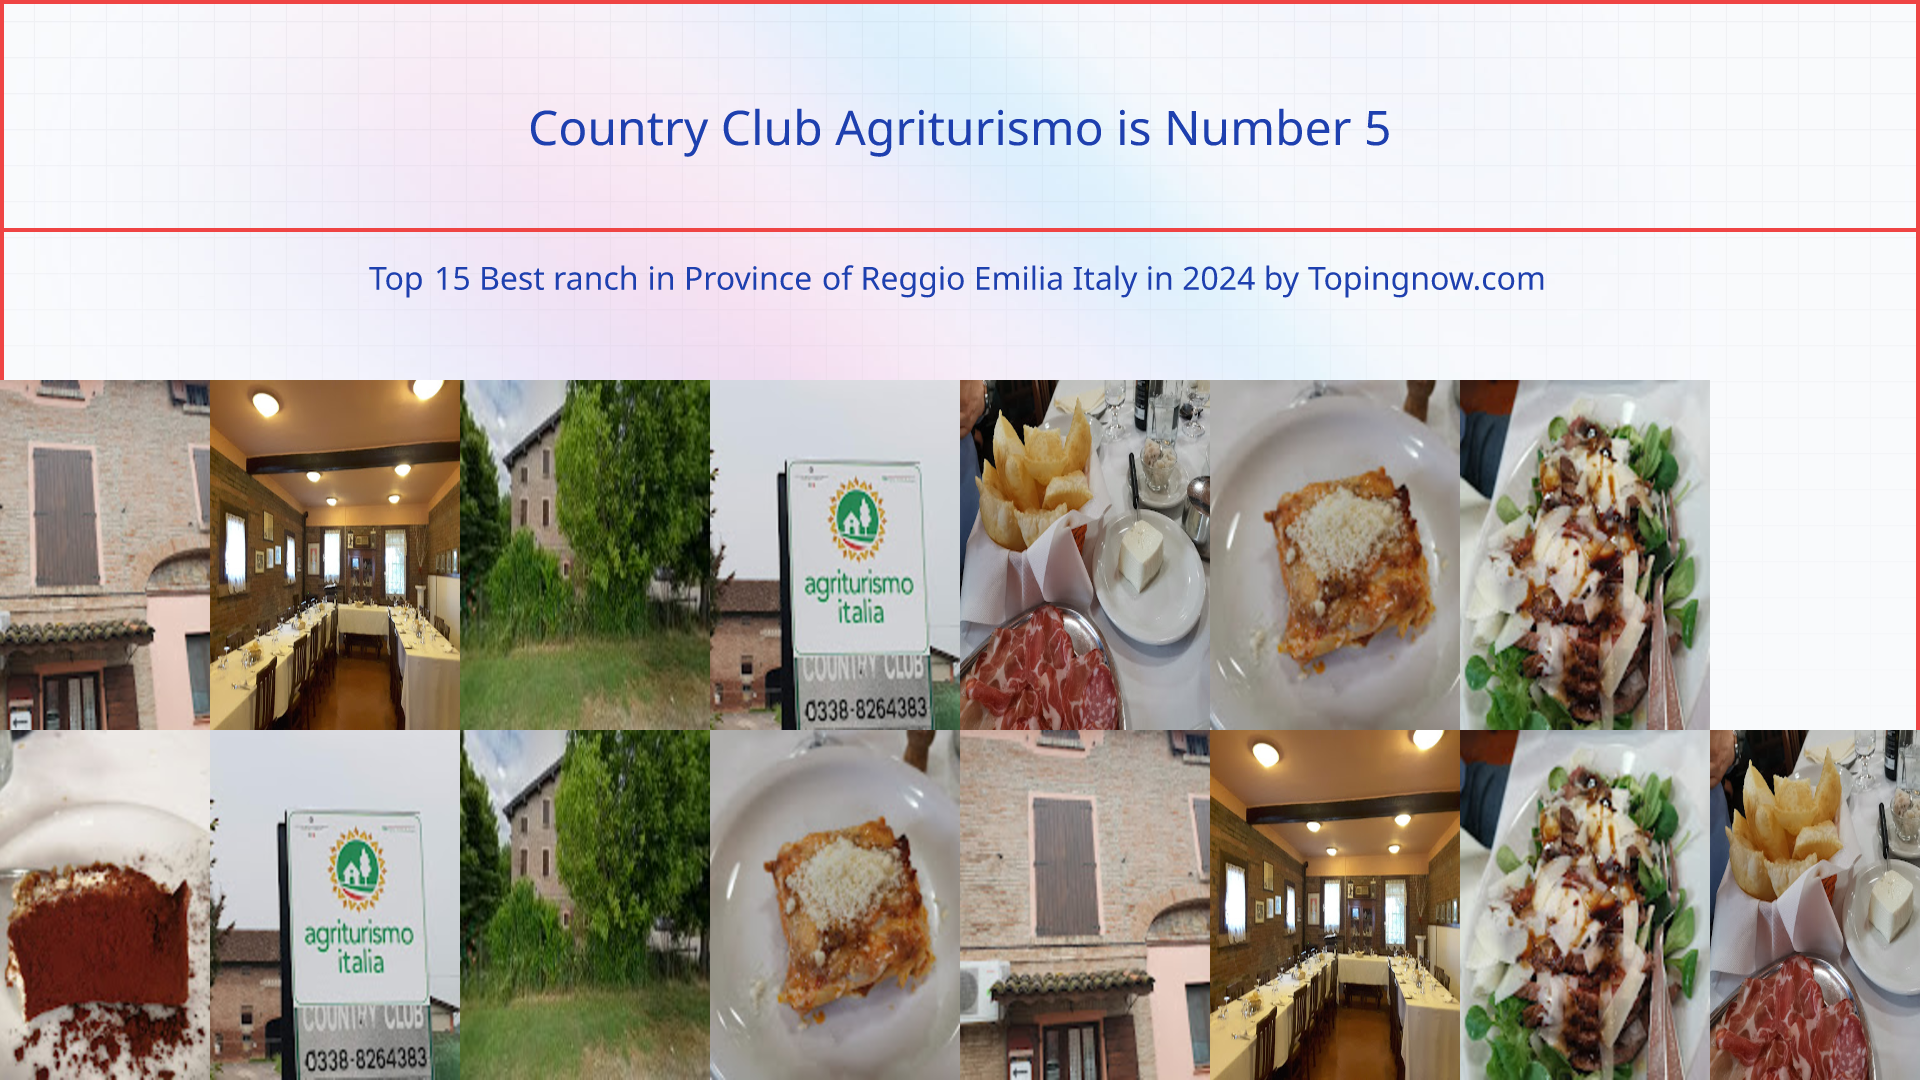 Country Club Agriturismo: Top 15 Best ranch in Province of Reggio Emilia Italy in 2024